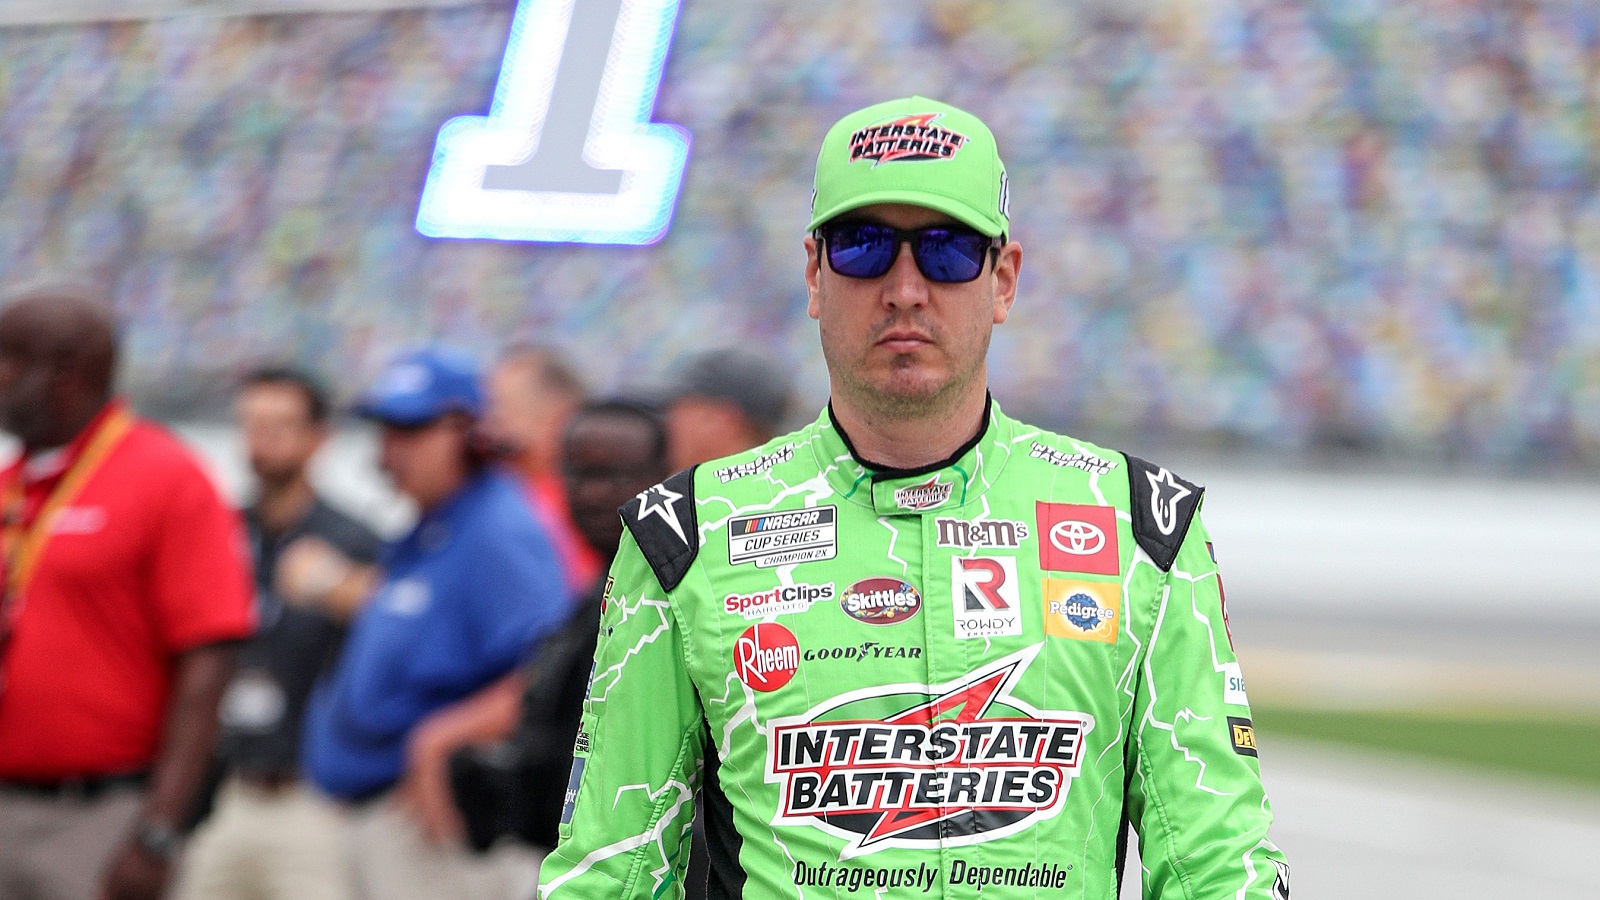 Kyle Busch walks the grid prior to the NASCAR Cup Series Coke Zero Sugar 400 at Daytona International Speedway on Aug. 28, 2022. | Meg Oliphant/Getty Images